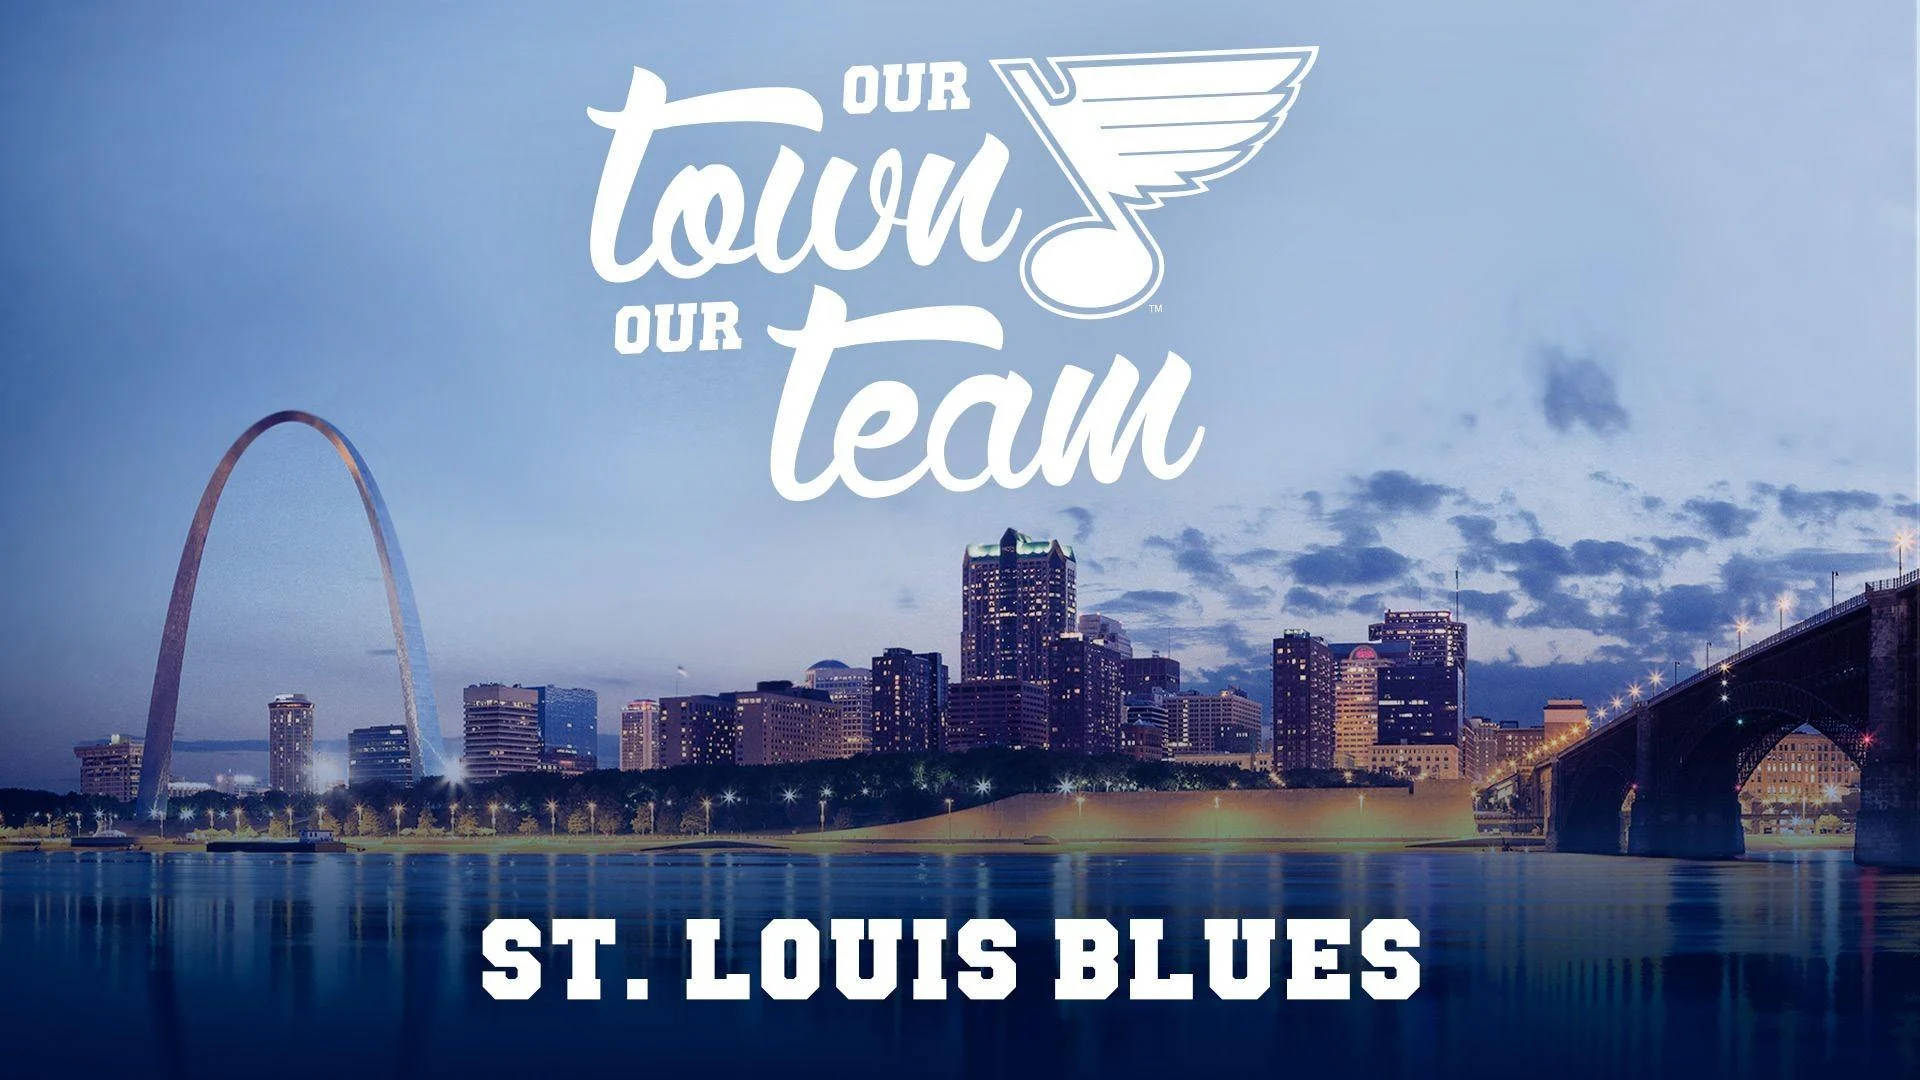 Stlouis Blues City Poster Would Be Translated To 